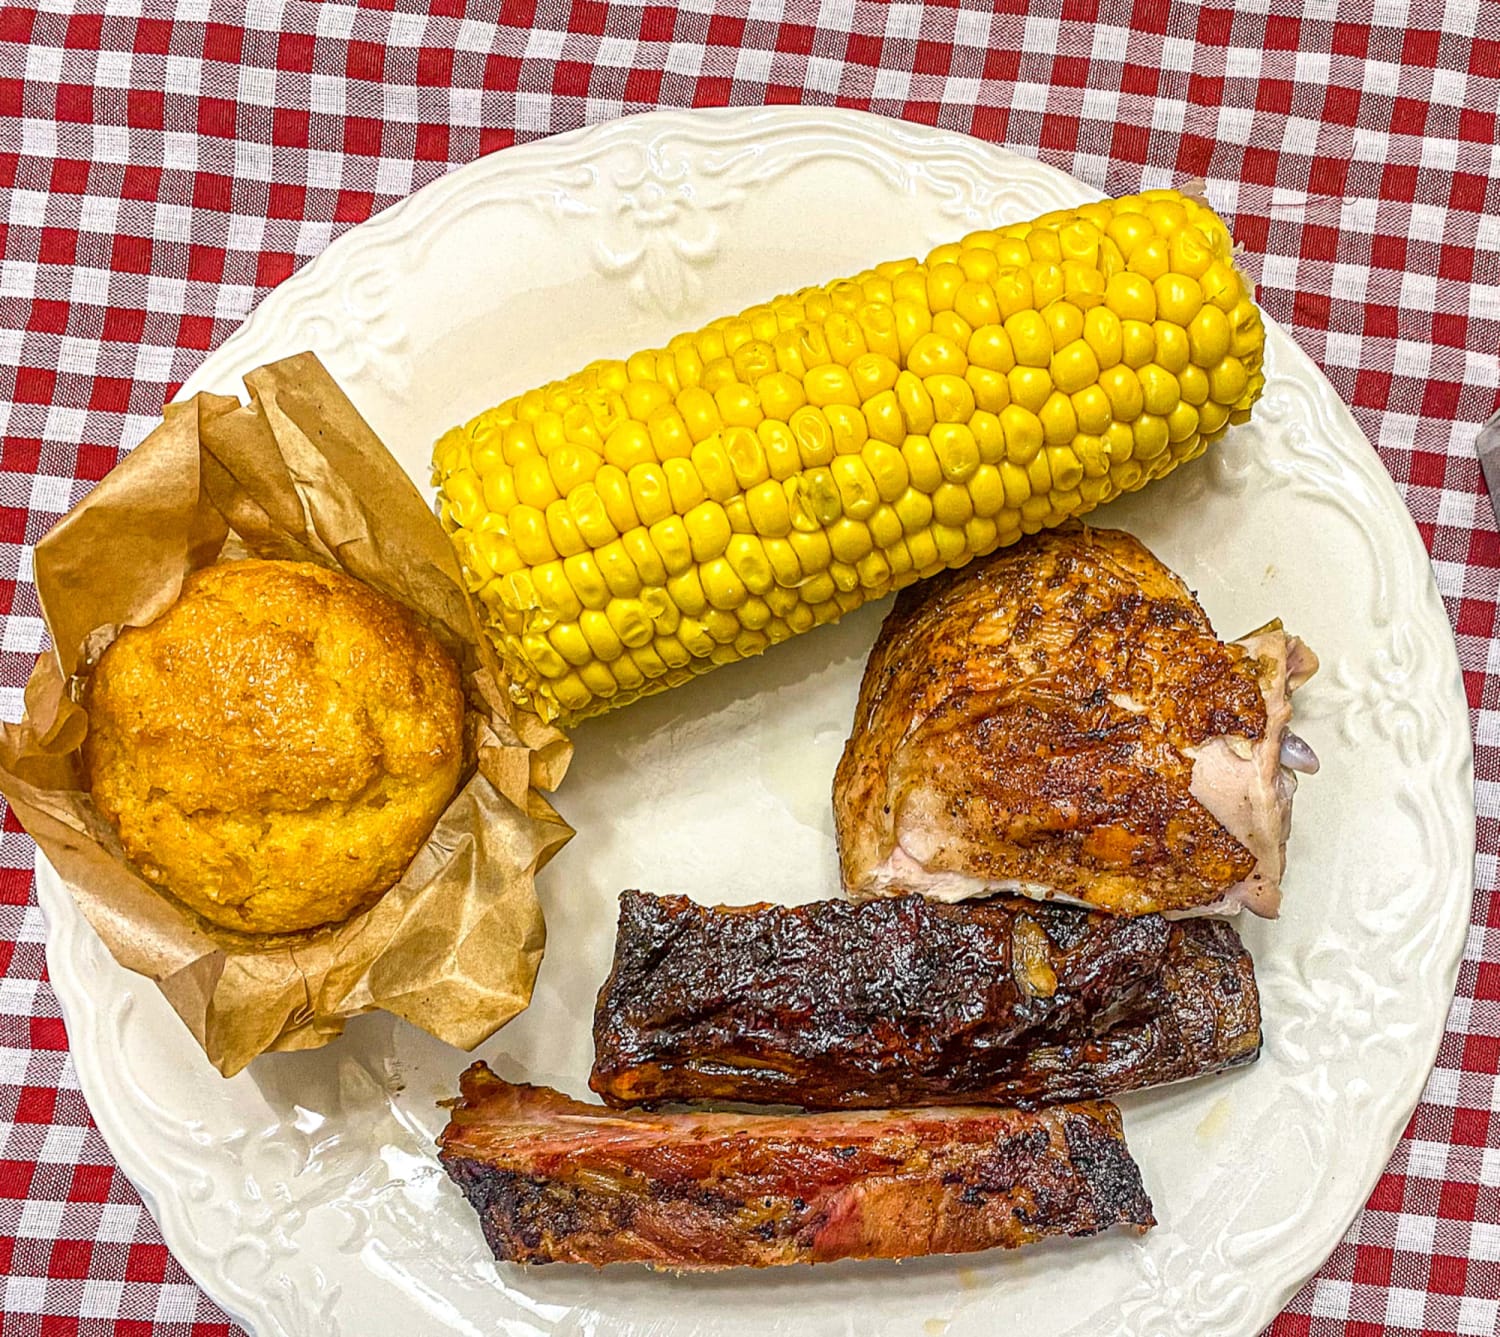 A delicious summer barbecue needs these key ingredients